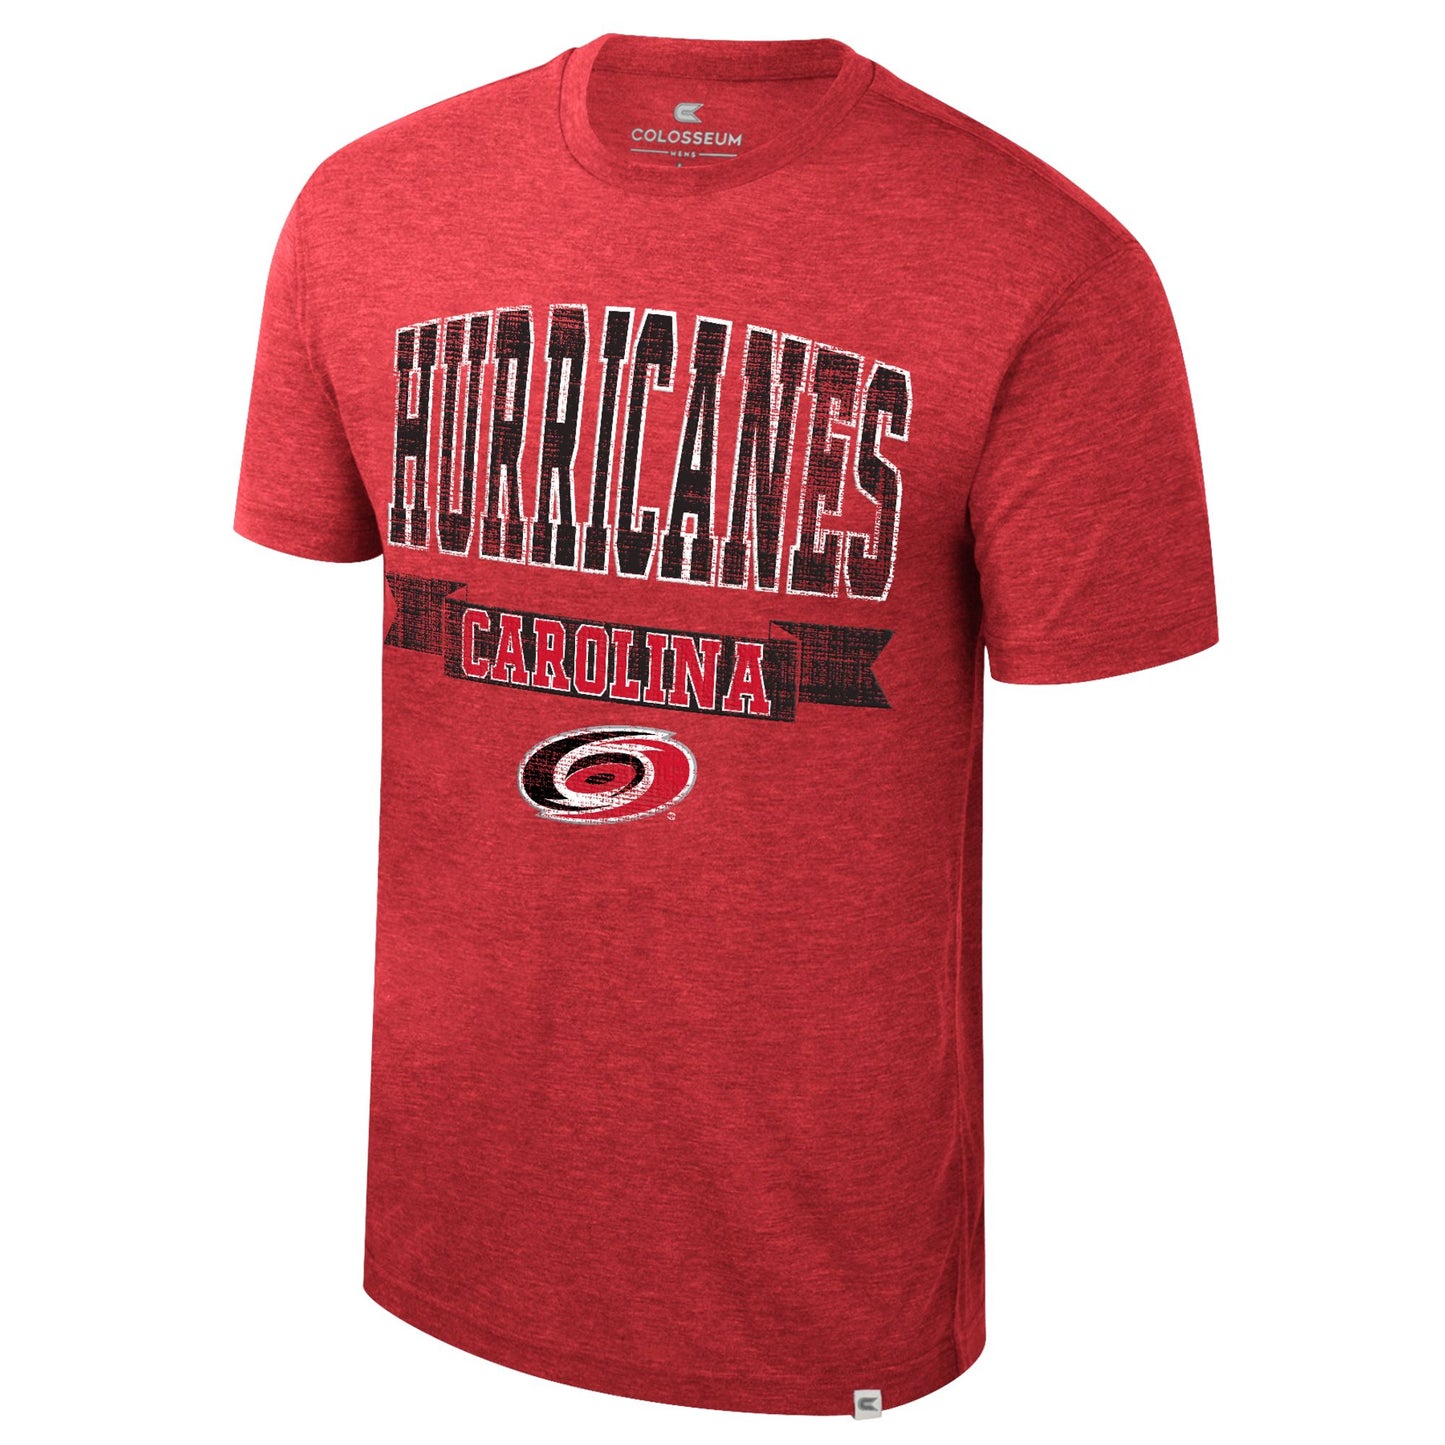 Red tee with Hurricanes Carolina on front with Hurricanes logo underneath text